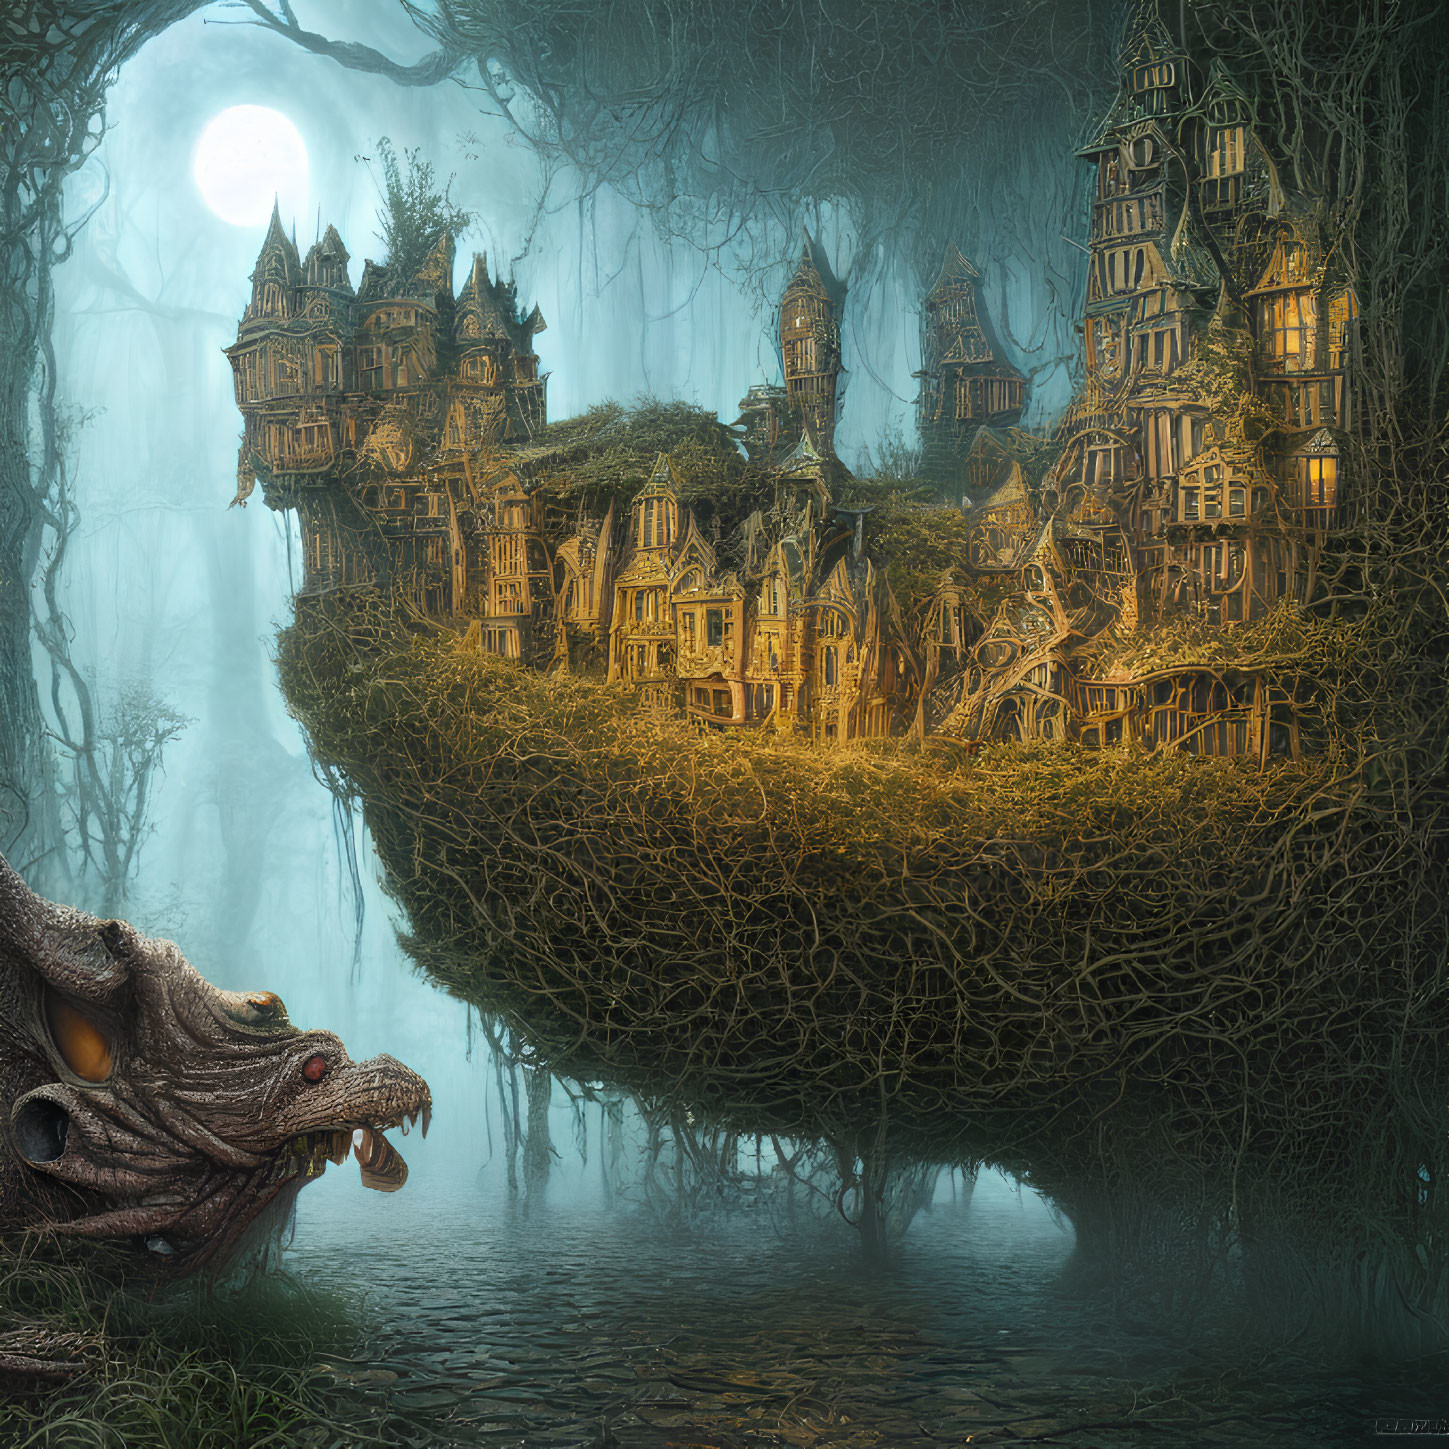 Enchanted forest scene with ancient dragon and Victorian tree town